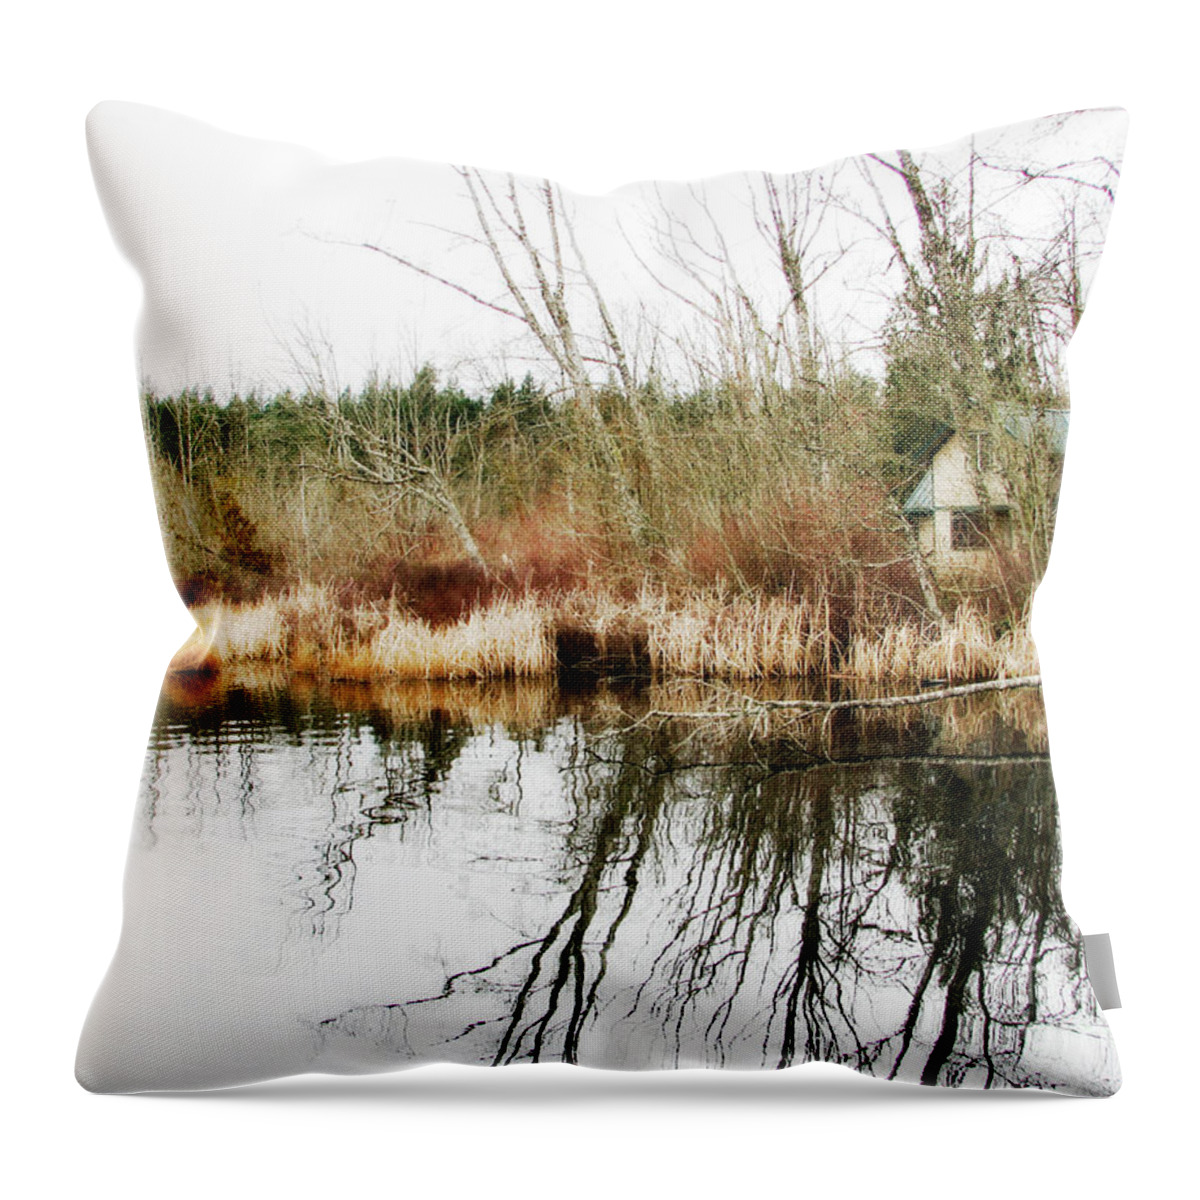 Landscape Throw Pillow featuring the photograph Where Gnomes Dwell by Rory Siegel